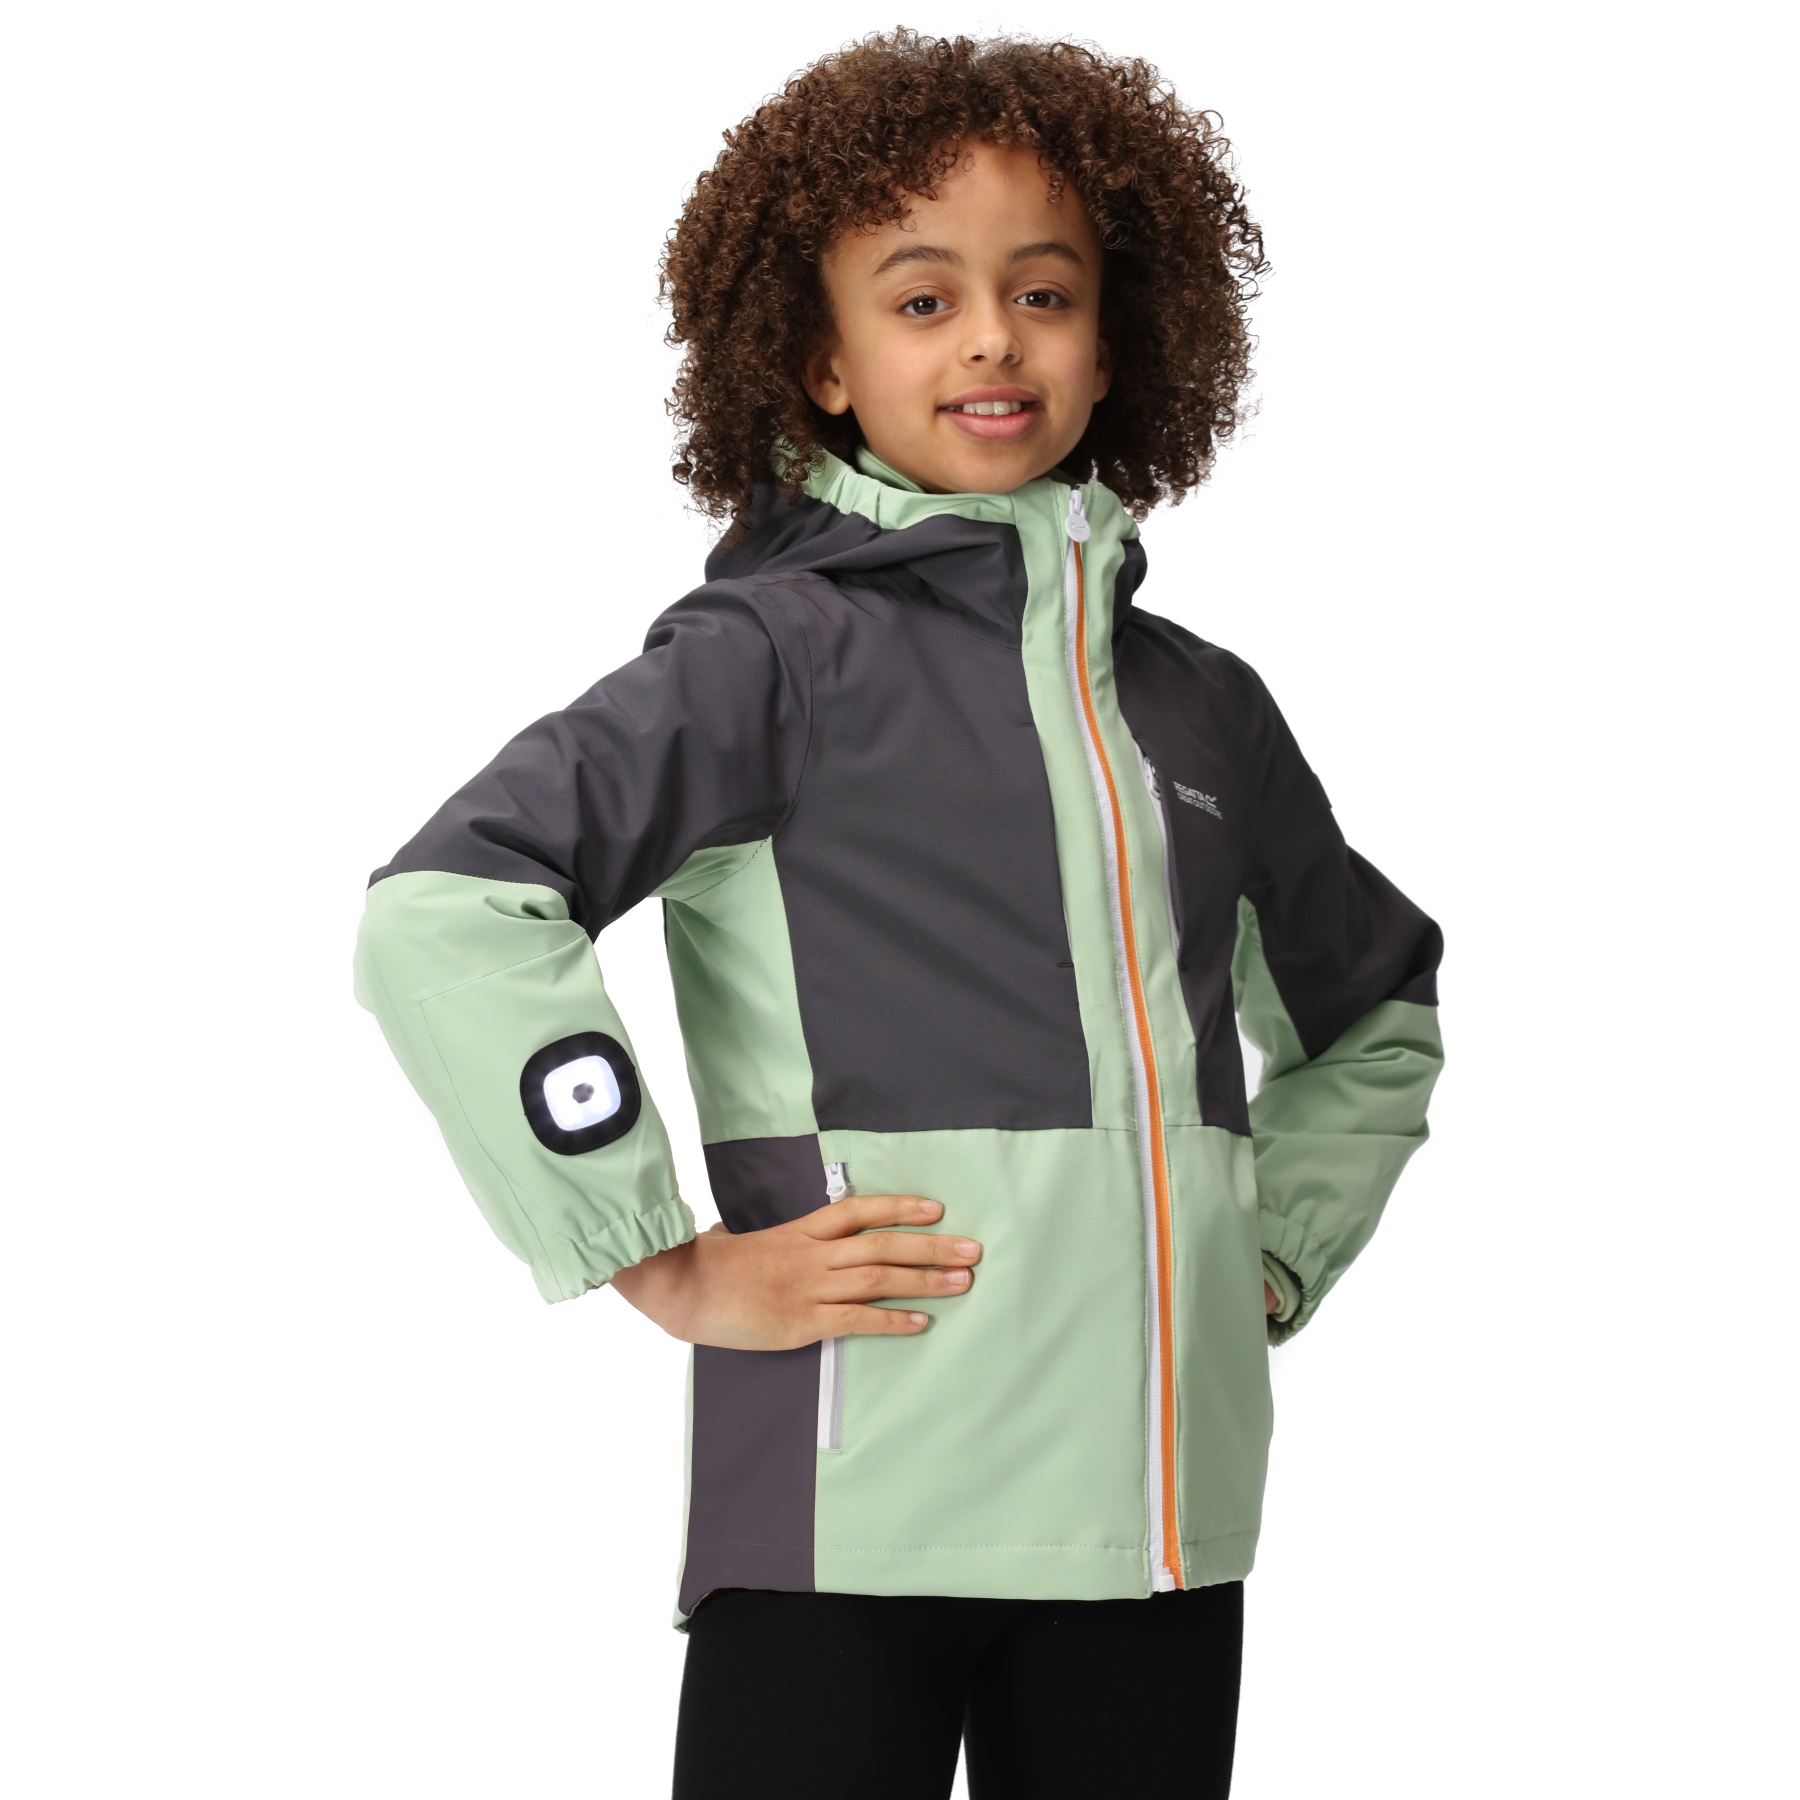 Picture of Regatta Hydrate VIII 3-in-1 Jacket Kids - Quiet Green/Seal Grey/Apricot Crush FDY